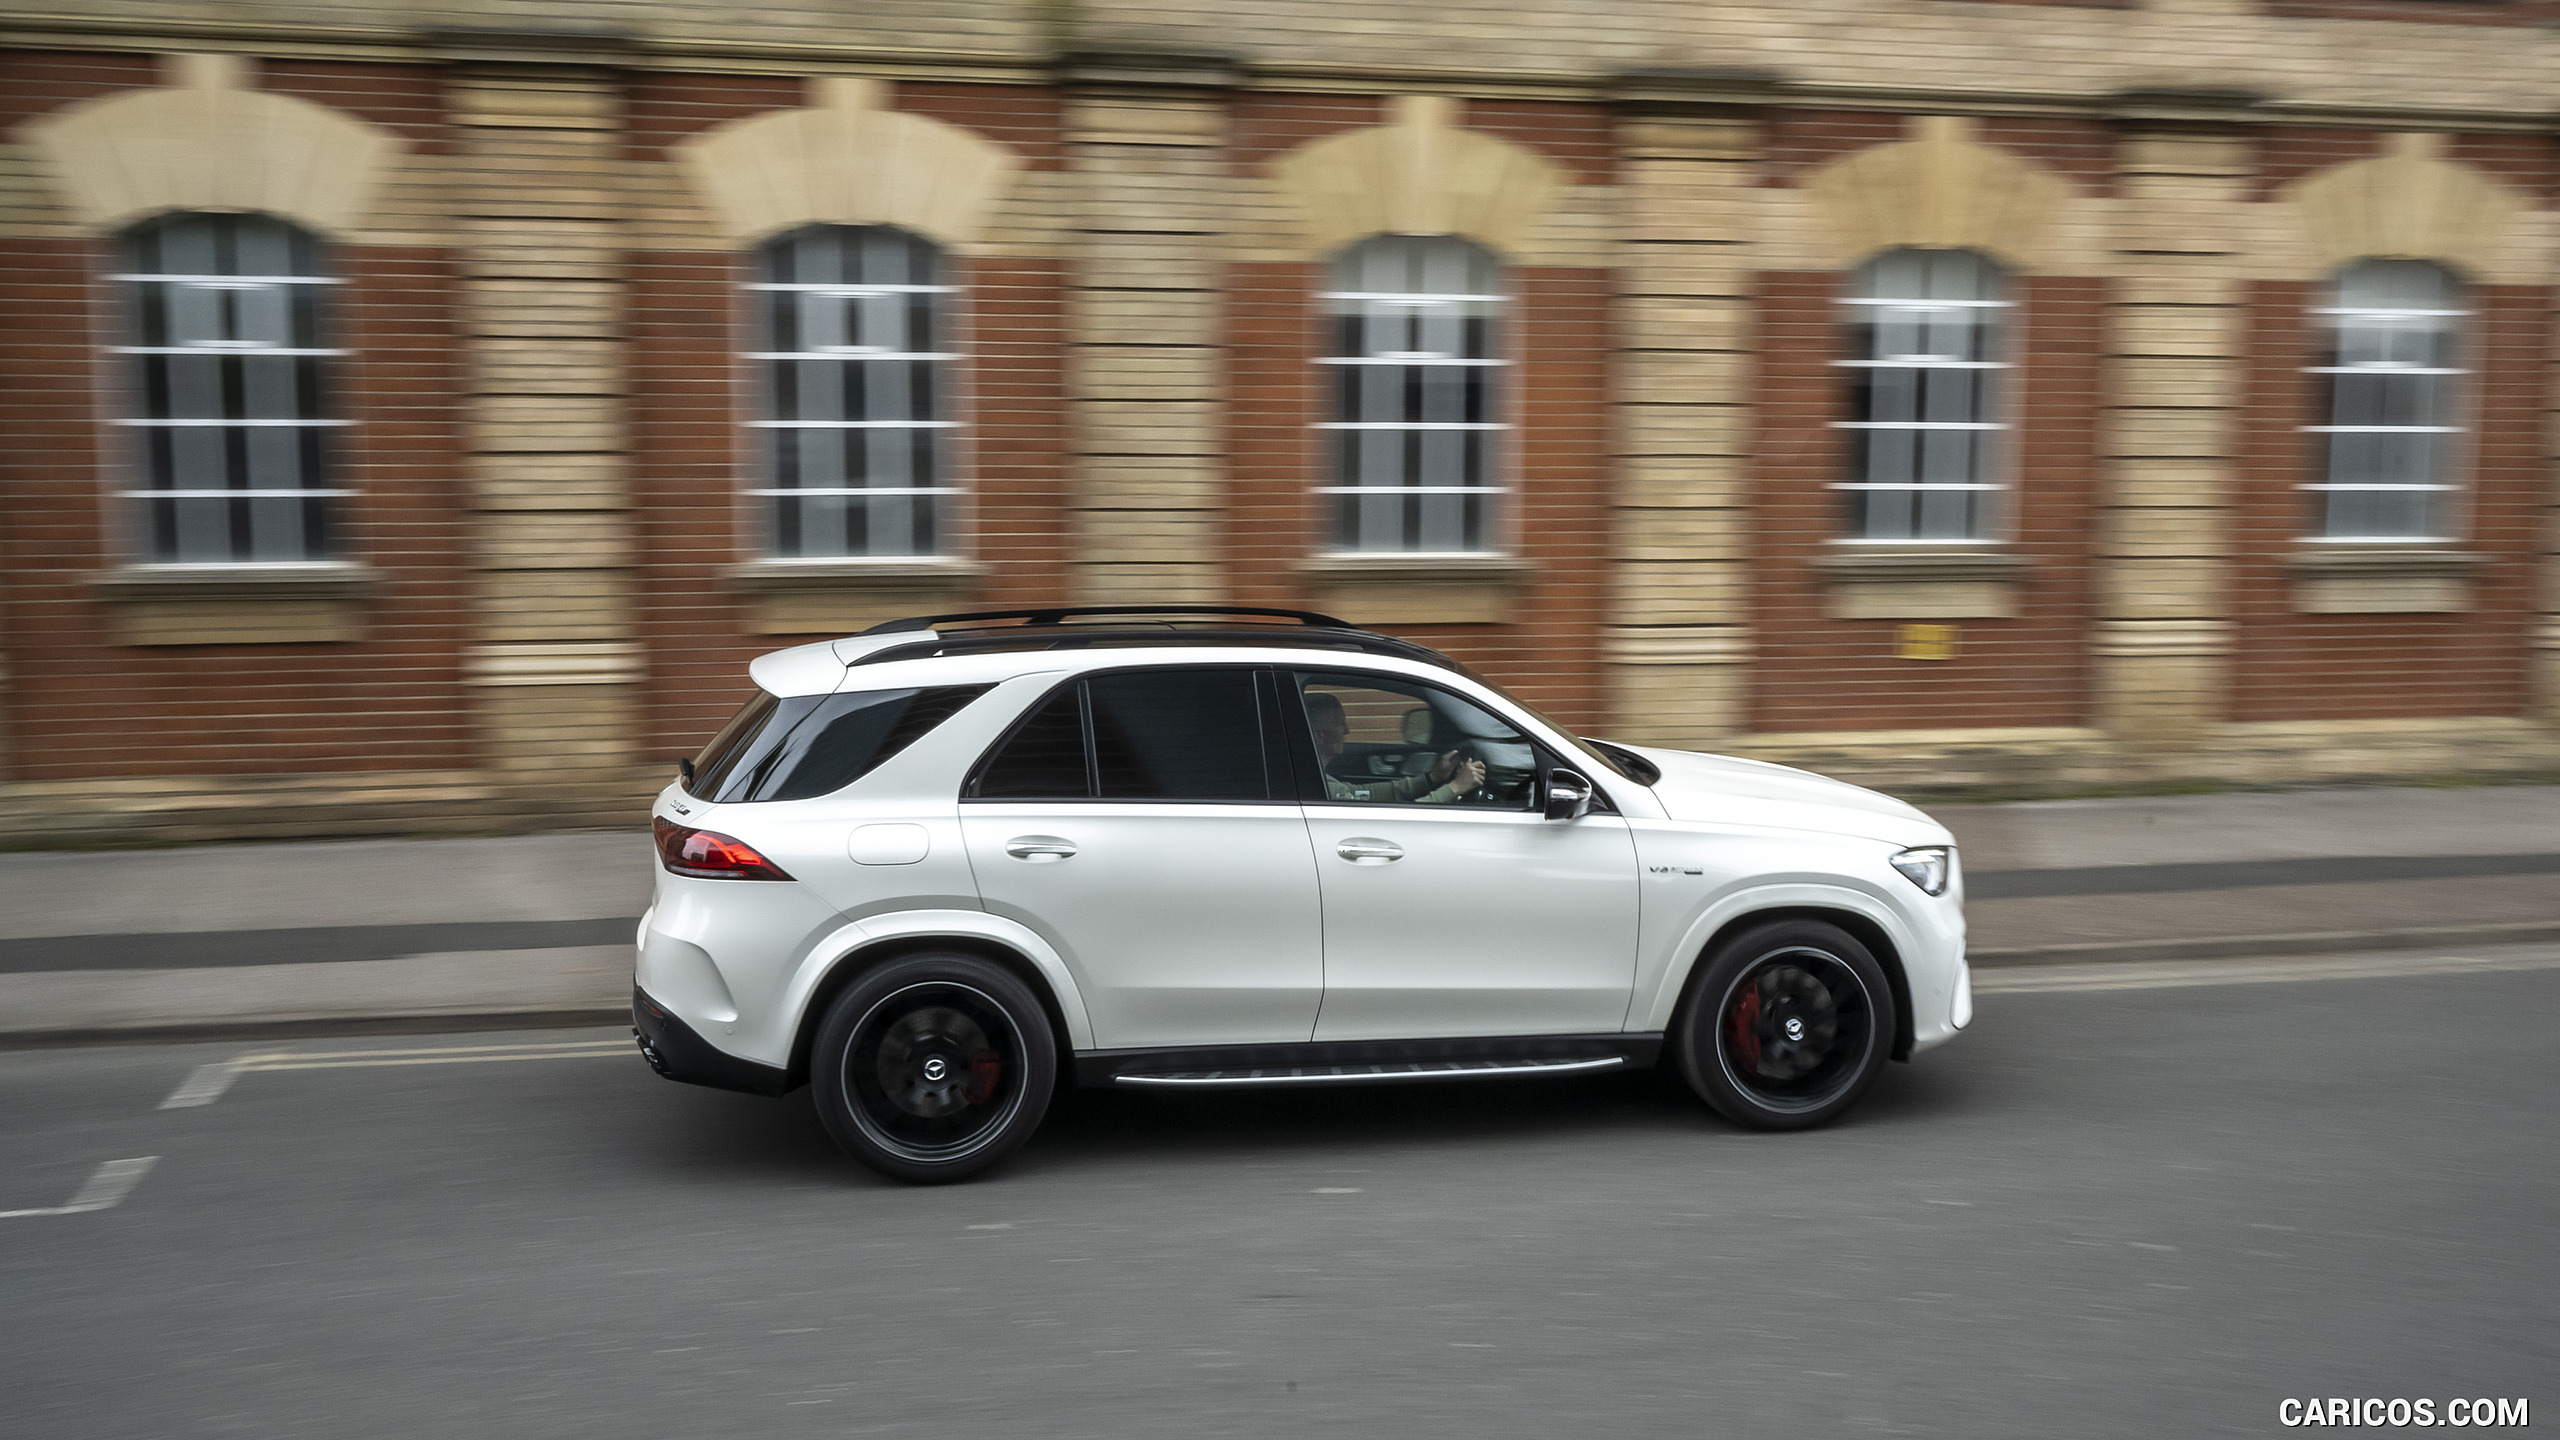 2021 Mercedes-AMG GLE 63 S 4MATIC (UK-Spec) - Side, #131 of 187